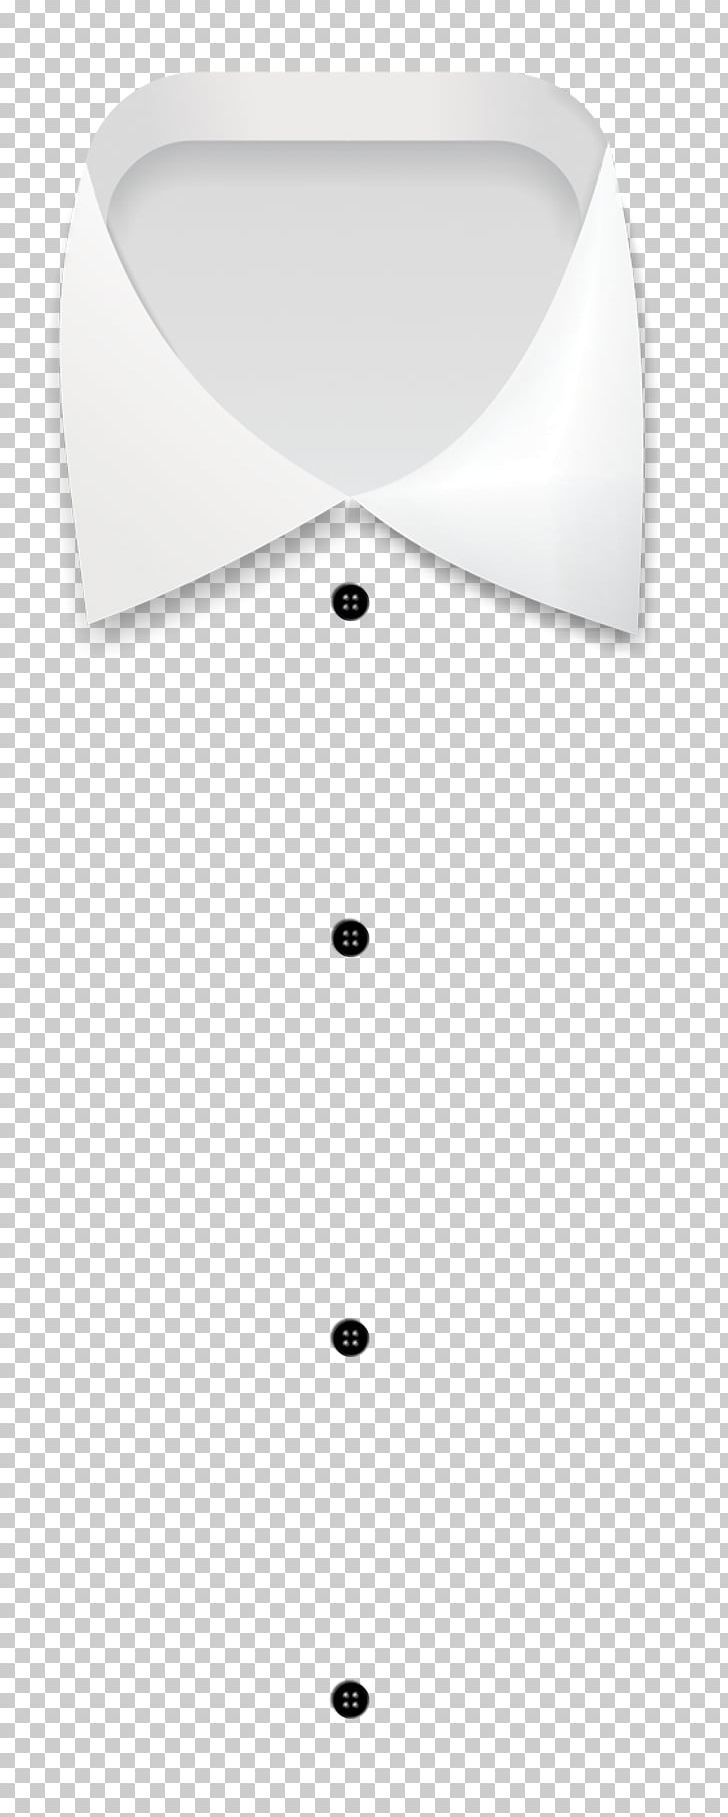 Collar Sleeve Dress Shirt Bathroom Pattern PNG, Clipart, Angle, Bathroom, Bathroom Sink, Button, Collar Free PNG Download